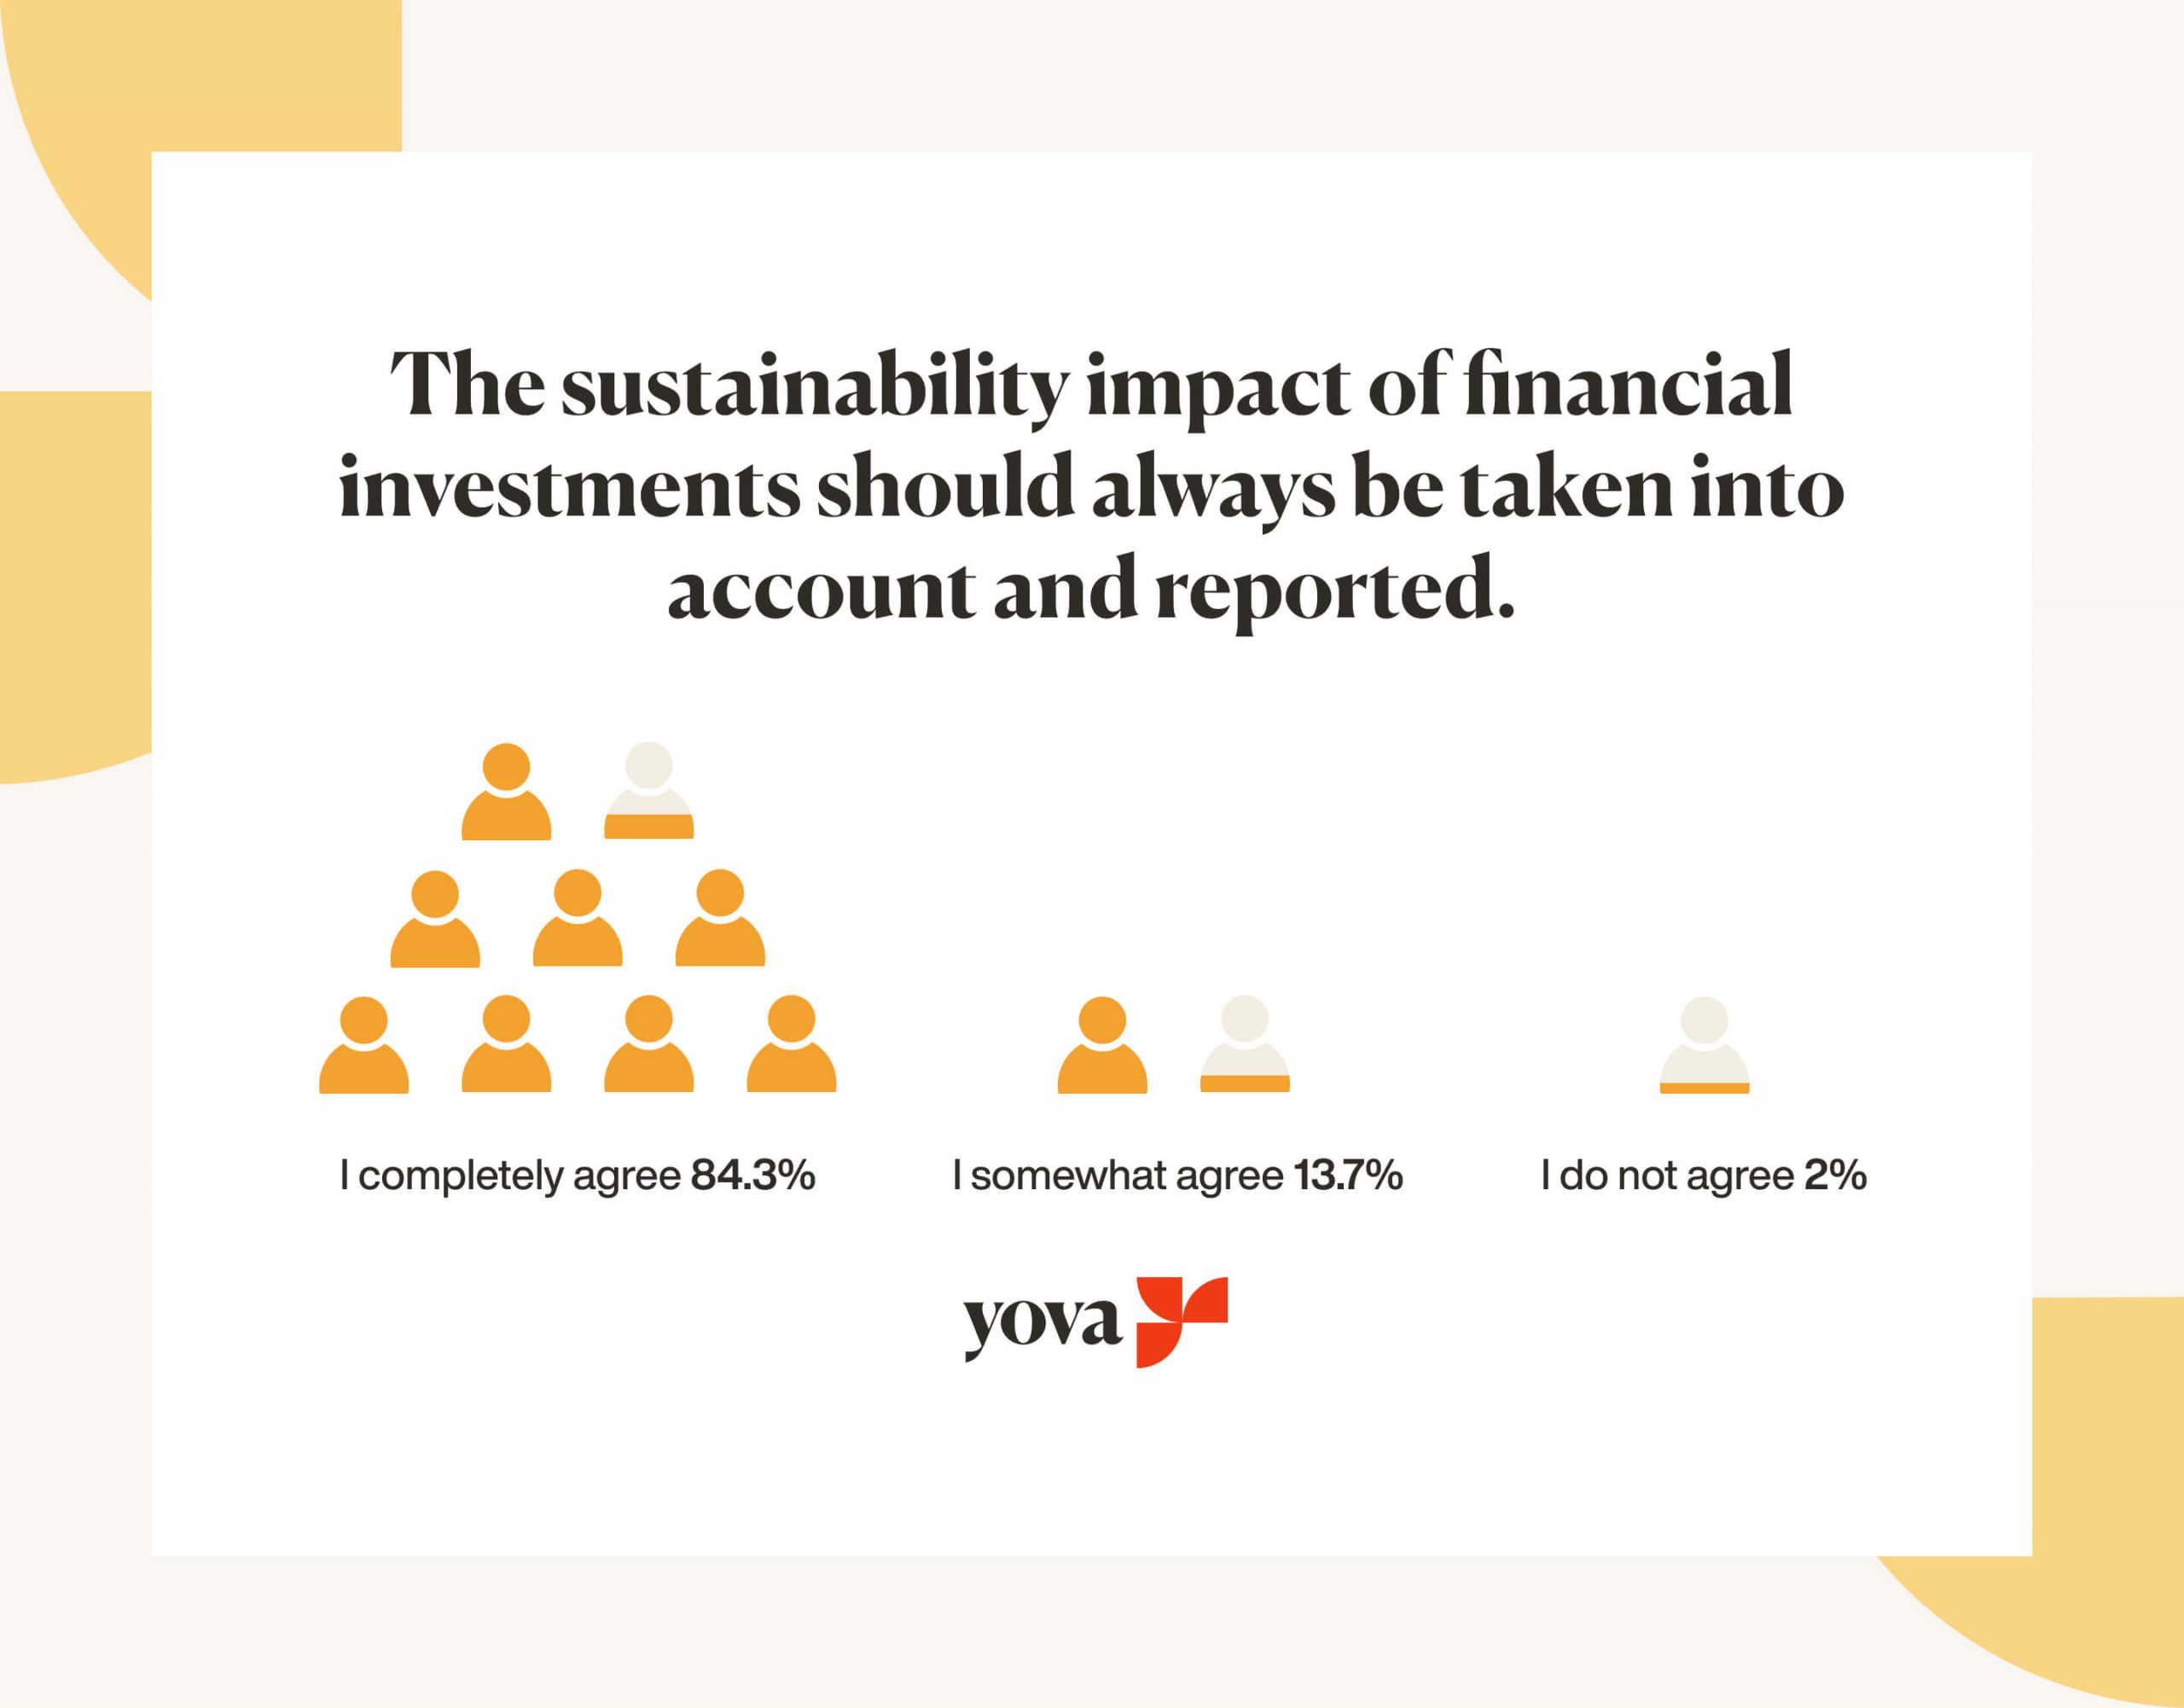 Graph showing that sustainability impact of financial investments should always be reported